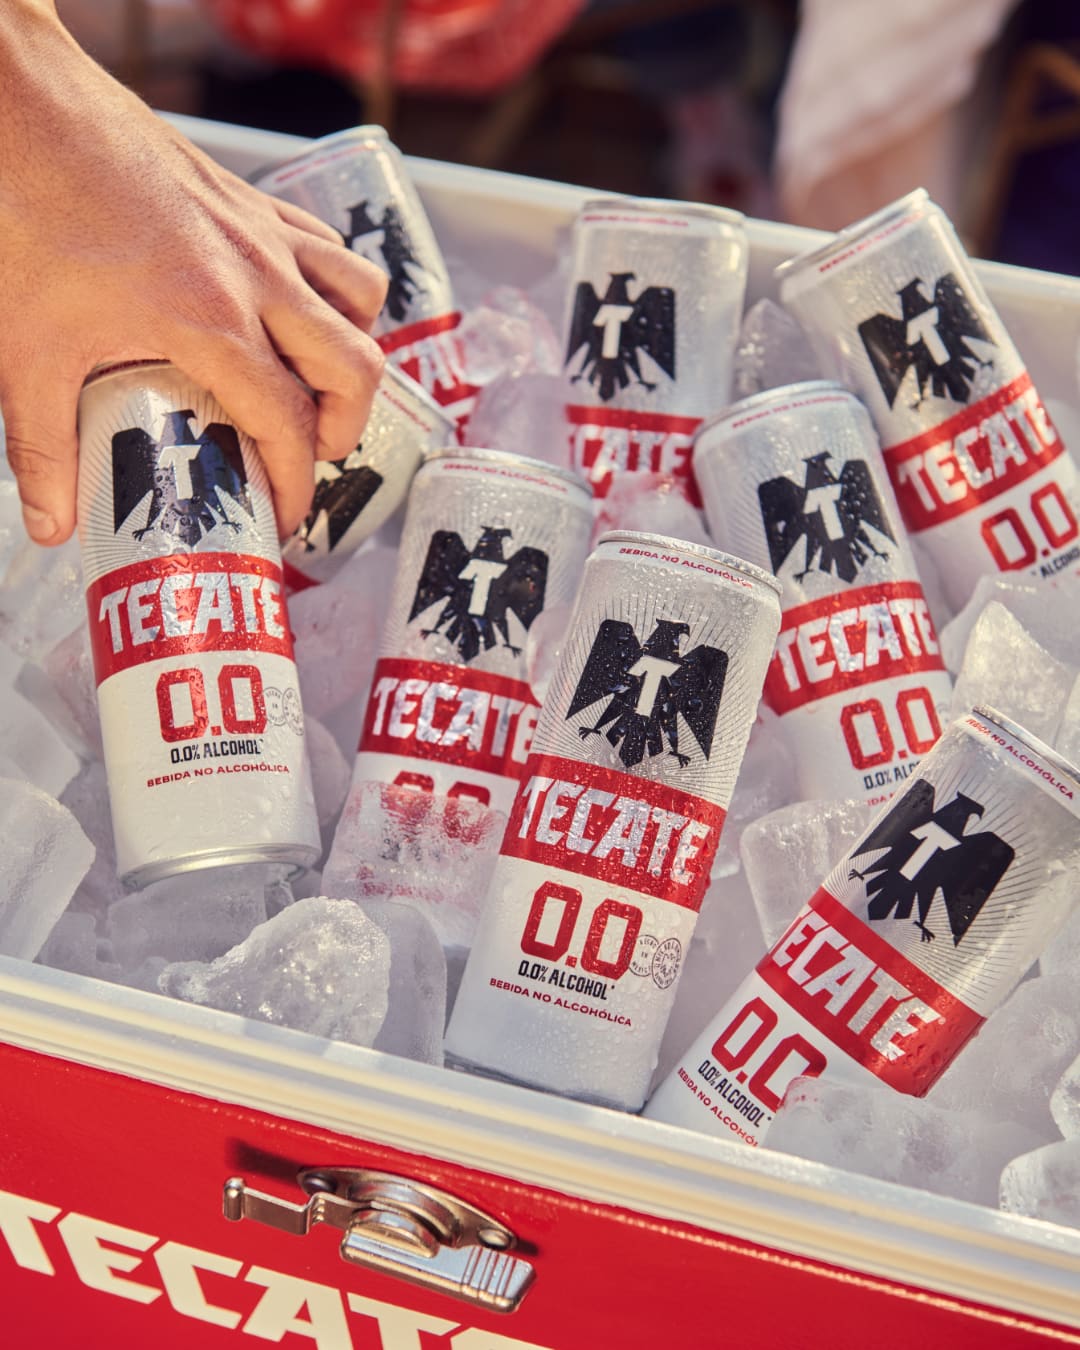 Tecate 00 beer can in a cooler